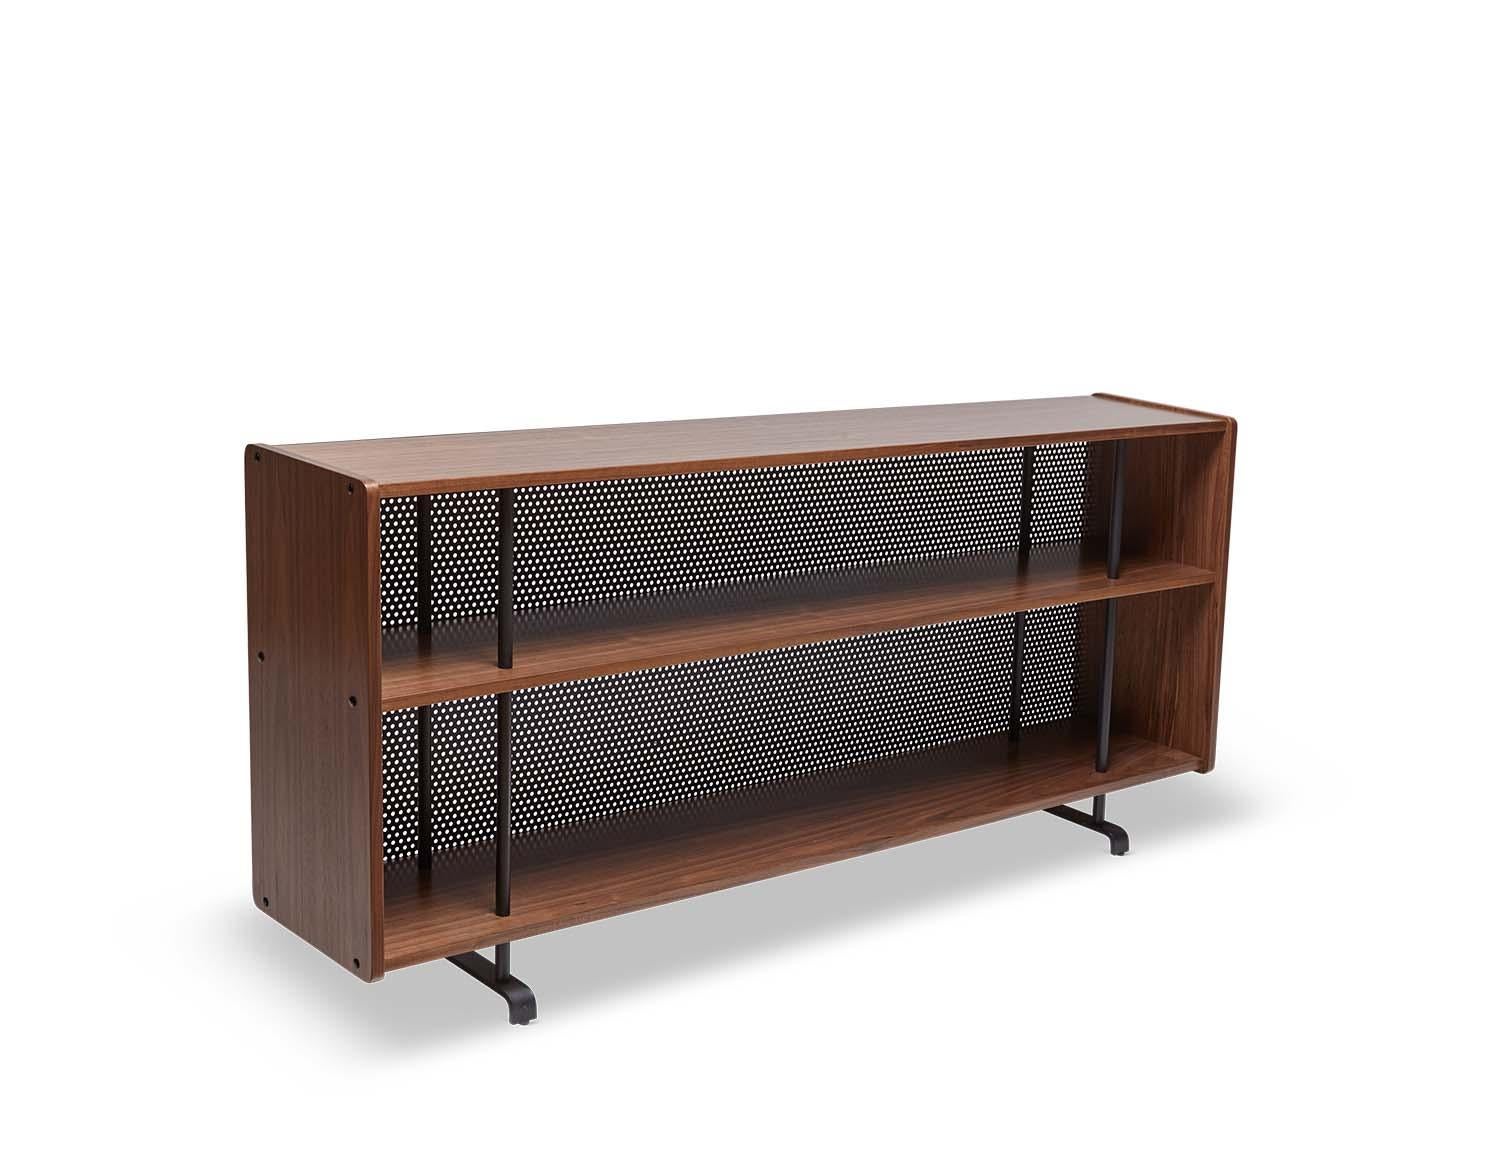 The Maker's console is made of American walnut or white oak and rests on a blackened steel base. Features two shelves and a perforated steel detail on the back. 

The Lawson-Fenning Collection is designed and handmade in Los Angeles, California.